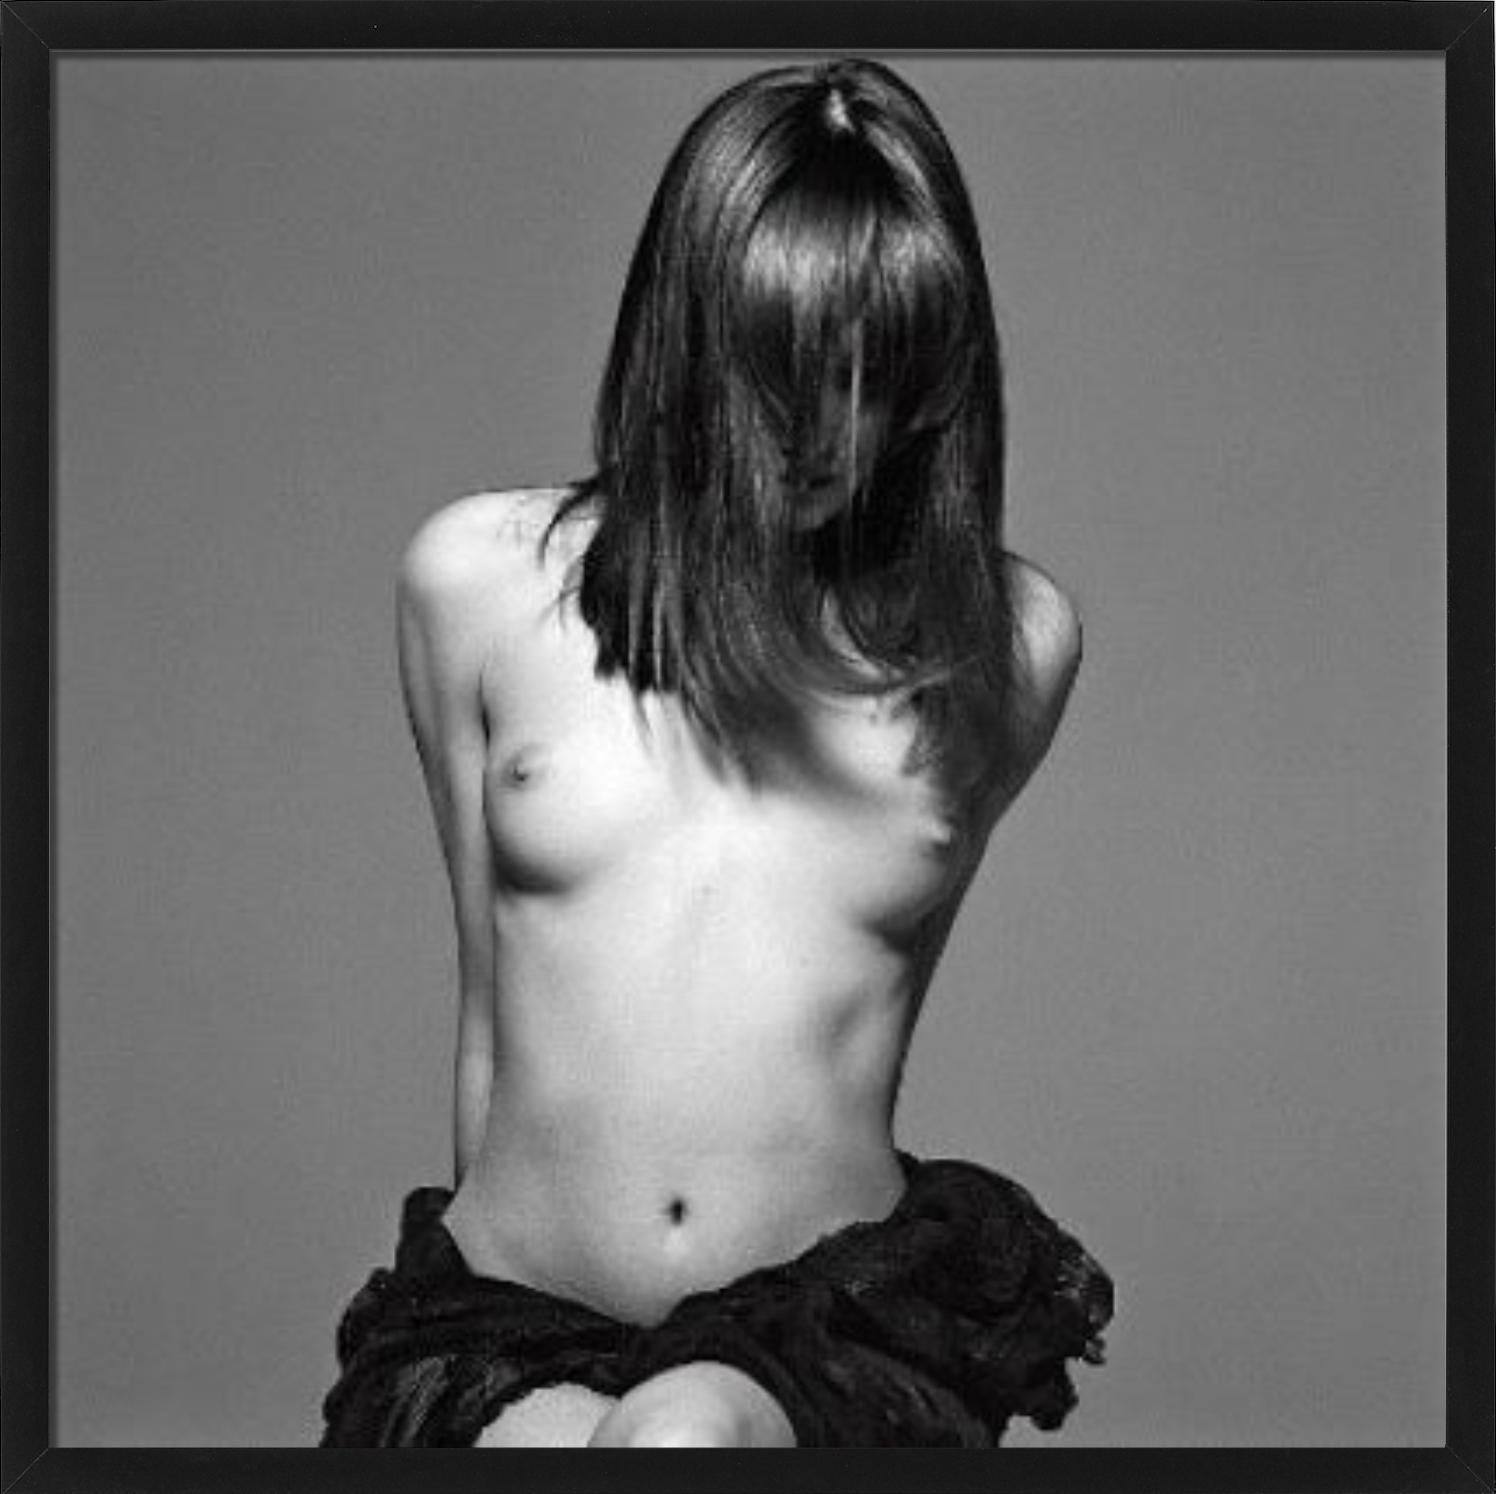 Carla Bruni, Safe Sex Campaign - the nude supermodel in a black skirt - Photograph by Michel Comte